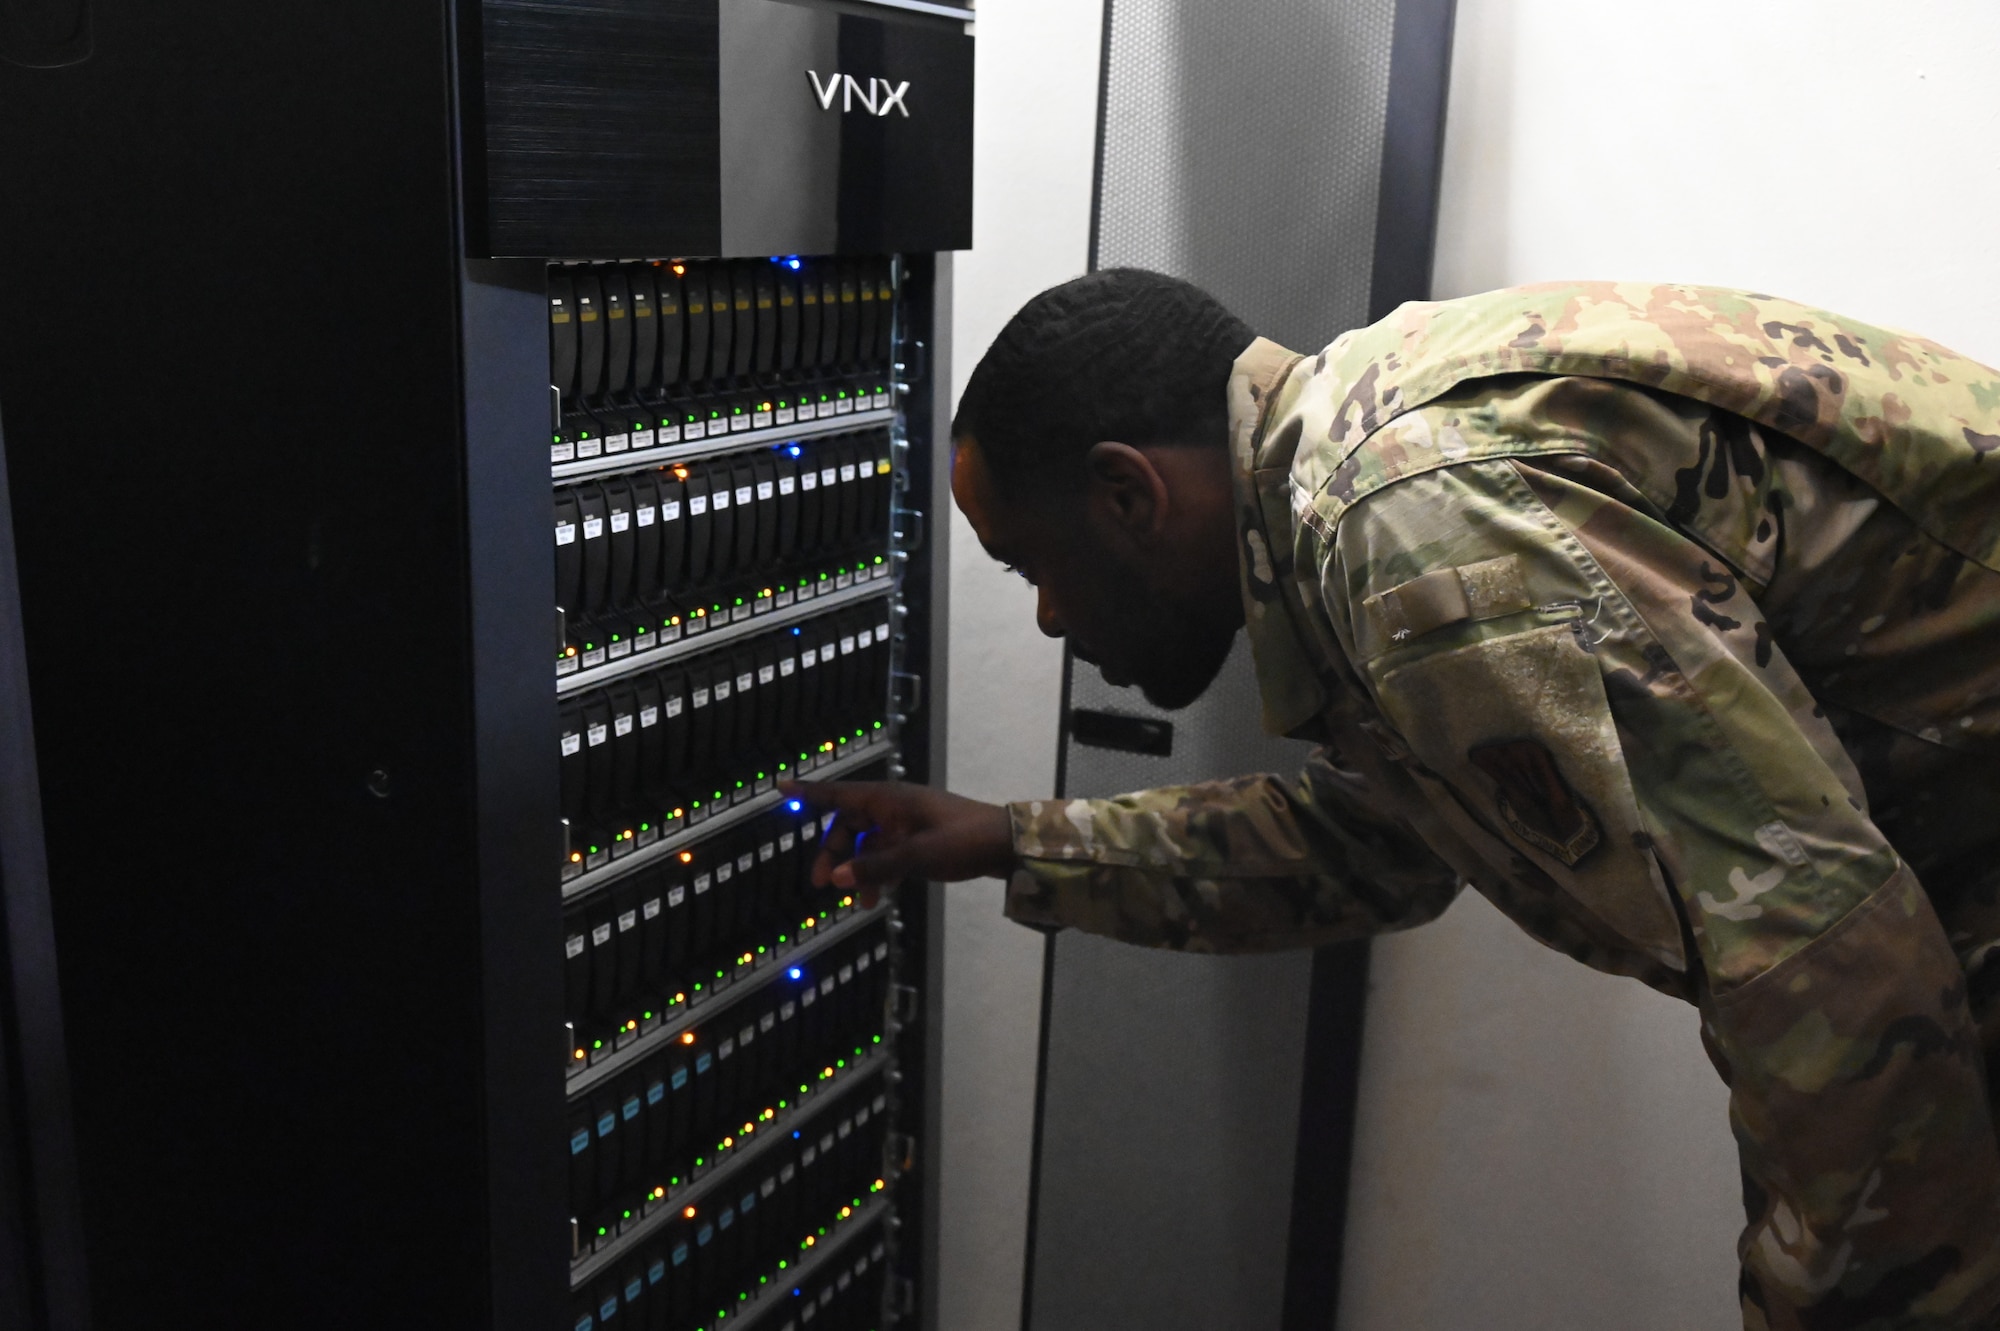 U.S. Air Force Staff Sgt. Diontae West, a cyber systems operations journeyman assigned to the 175th Communications Flight, Maryland Air National Guard, inspects computer servers, July 19, 2022, during annual training at Aviano Air Base, Italy.